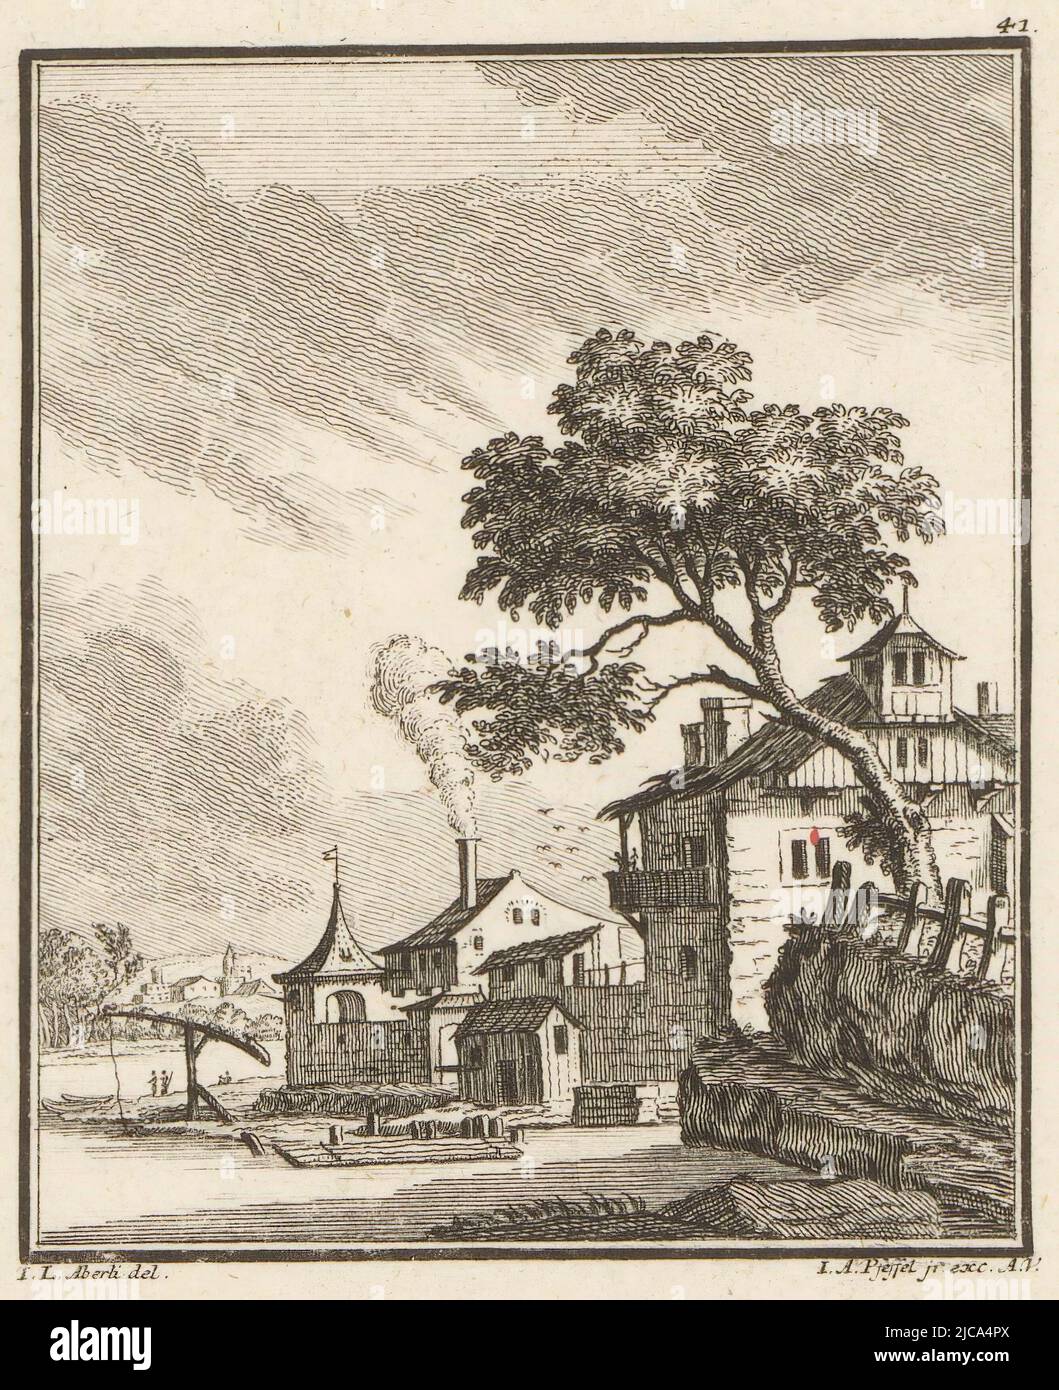 Top right printed number 41, View of a country house, print maker: Johann Andreas Pfeffel (der Jüngere), (mentioned on object), intermediary draughtsman: Johann Ludwig Aberli, (mentioned on object), 1725 - 1768, paper, etching, h 110 mm - w 100 mm Stock Photo